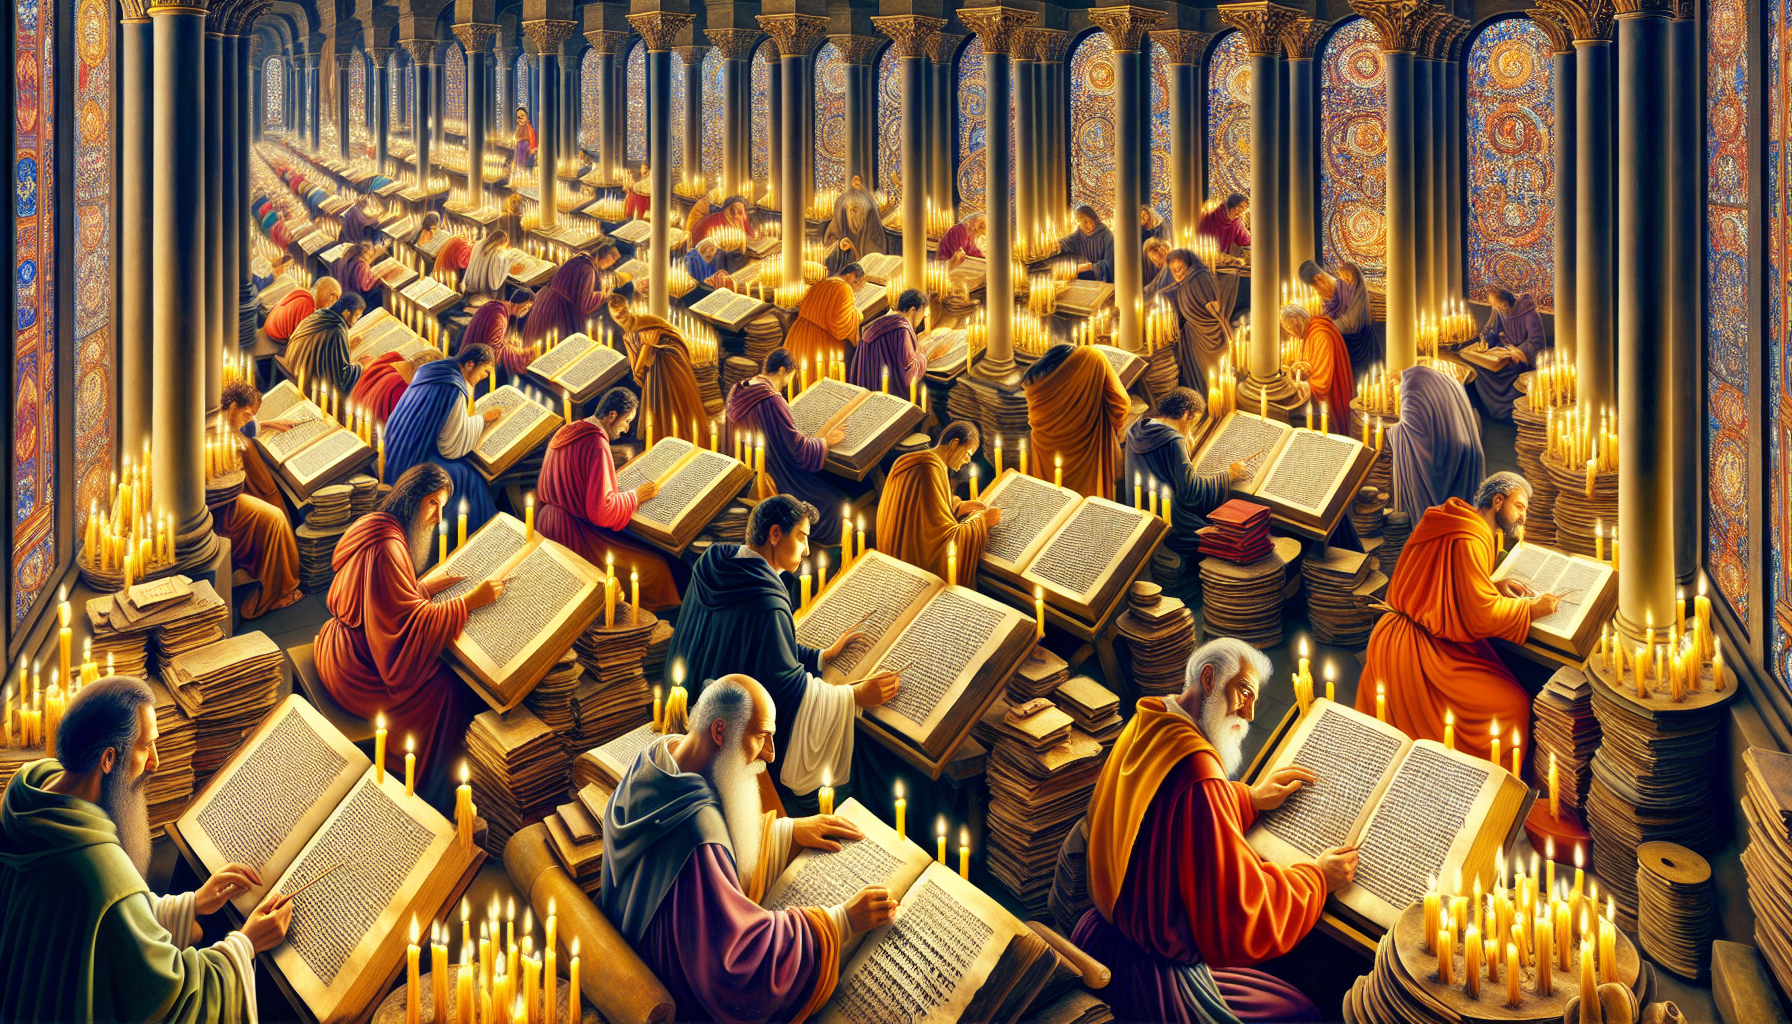 An artistic depiction of ancient scribes writing the New Testament manuscripts in a candlelit monastery library, filled with scrolls and parchments, during the early Christian era.